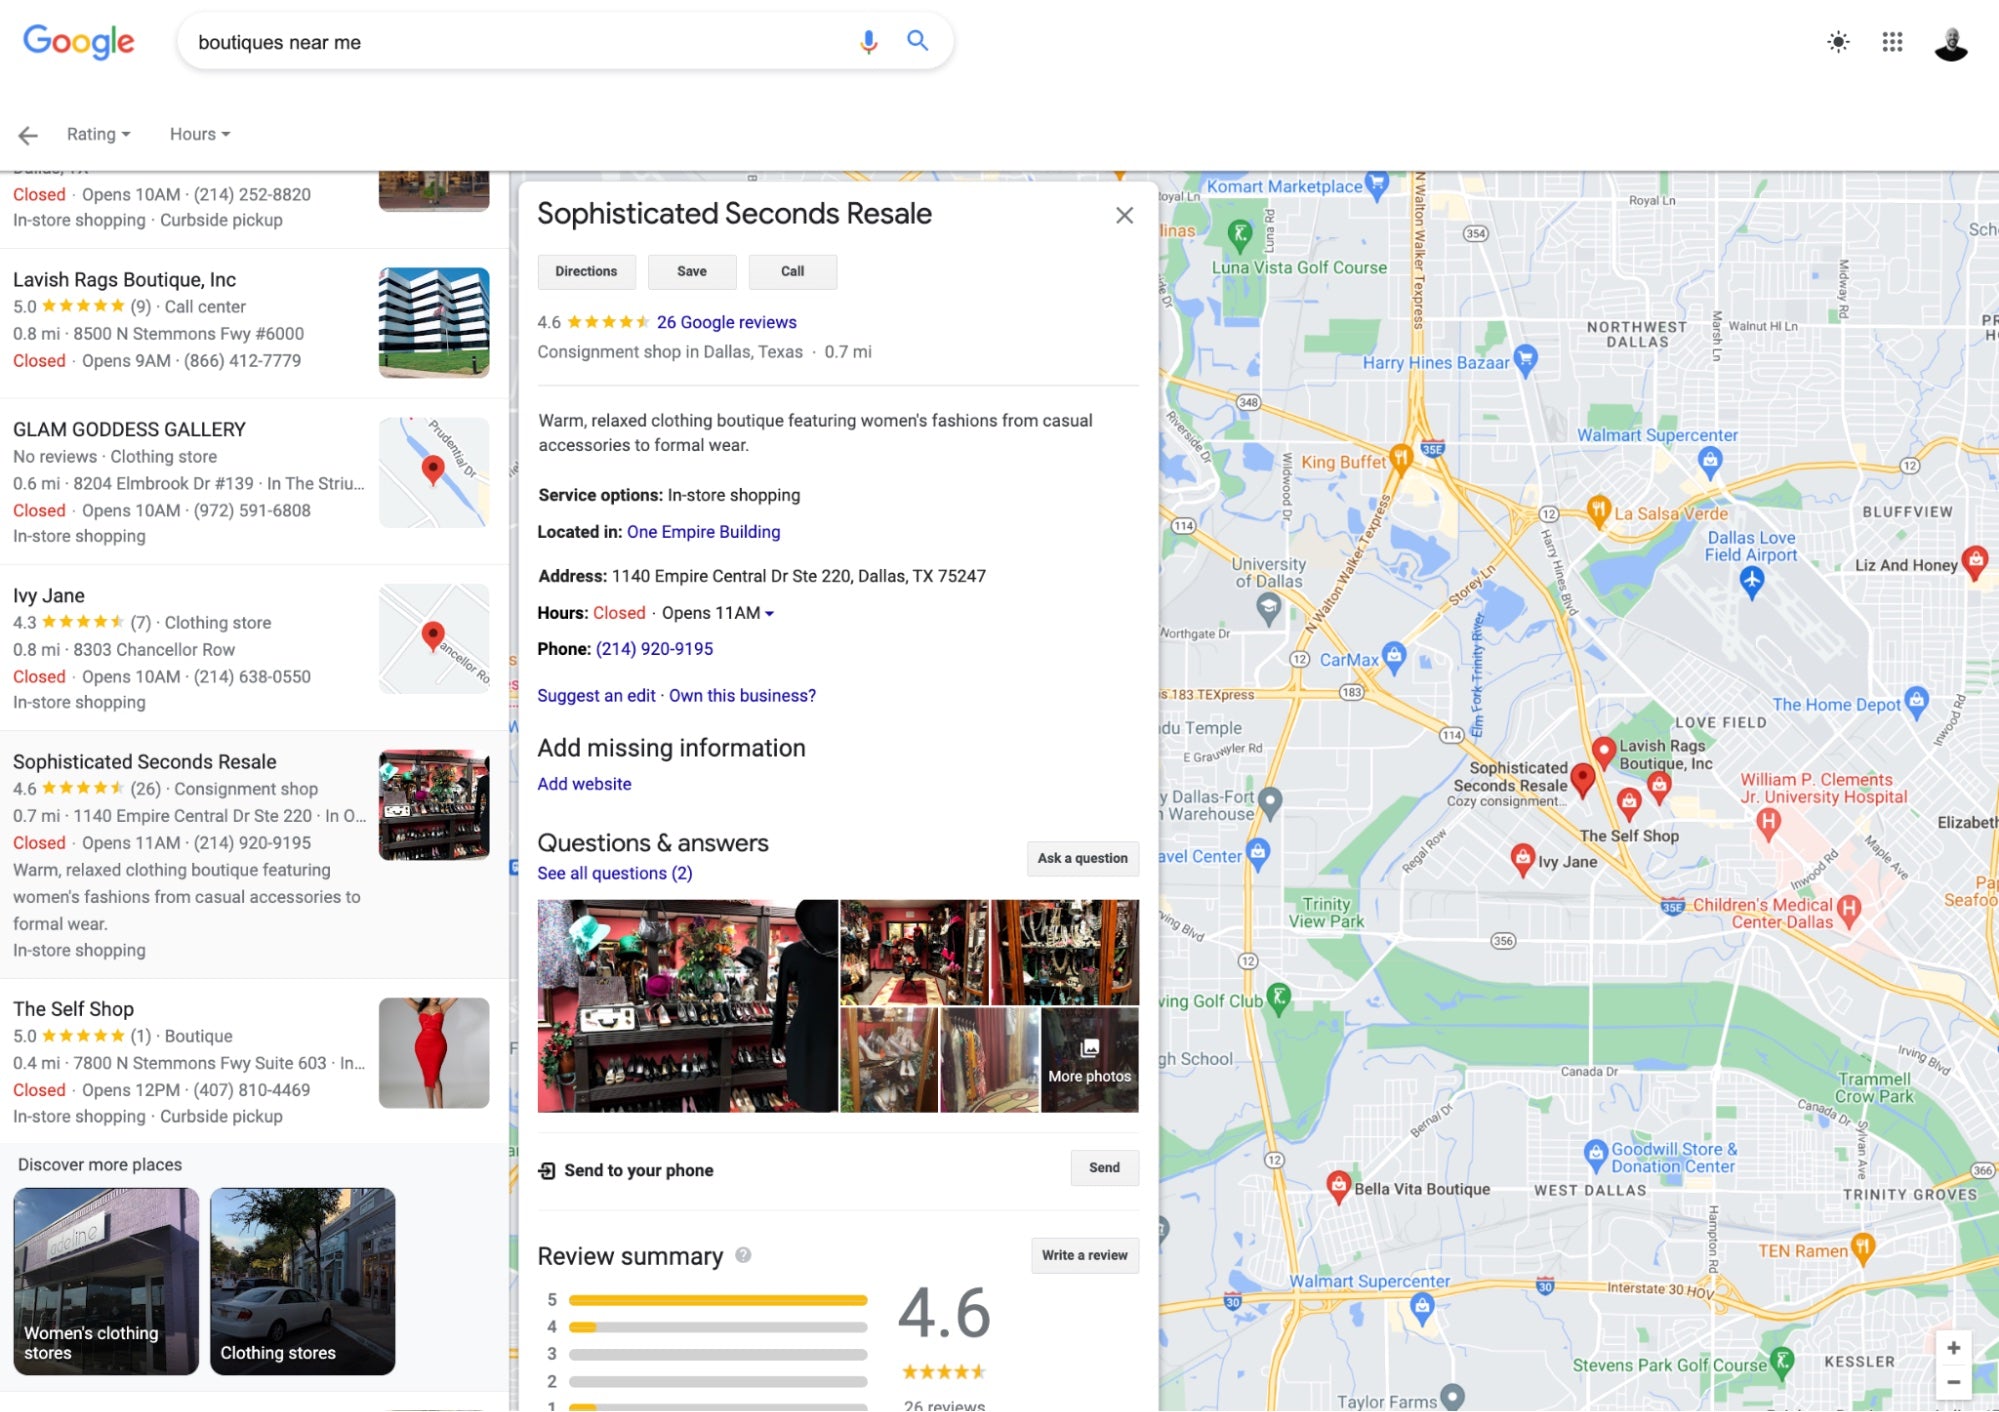 Example of Google Maps listings